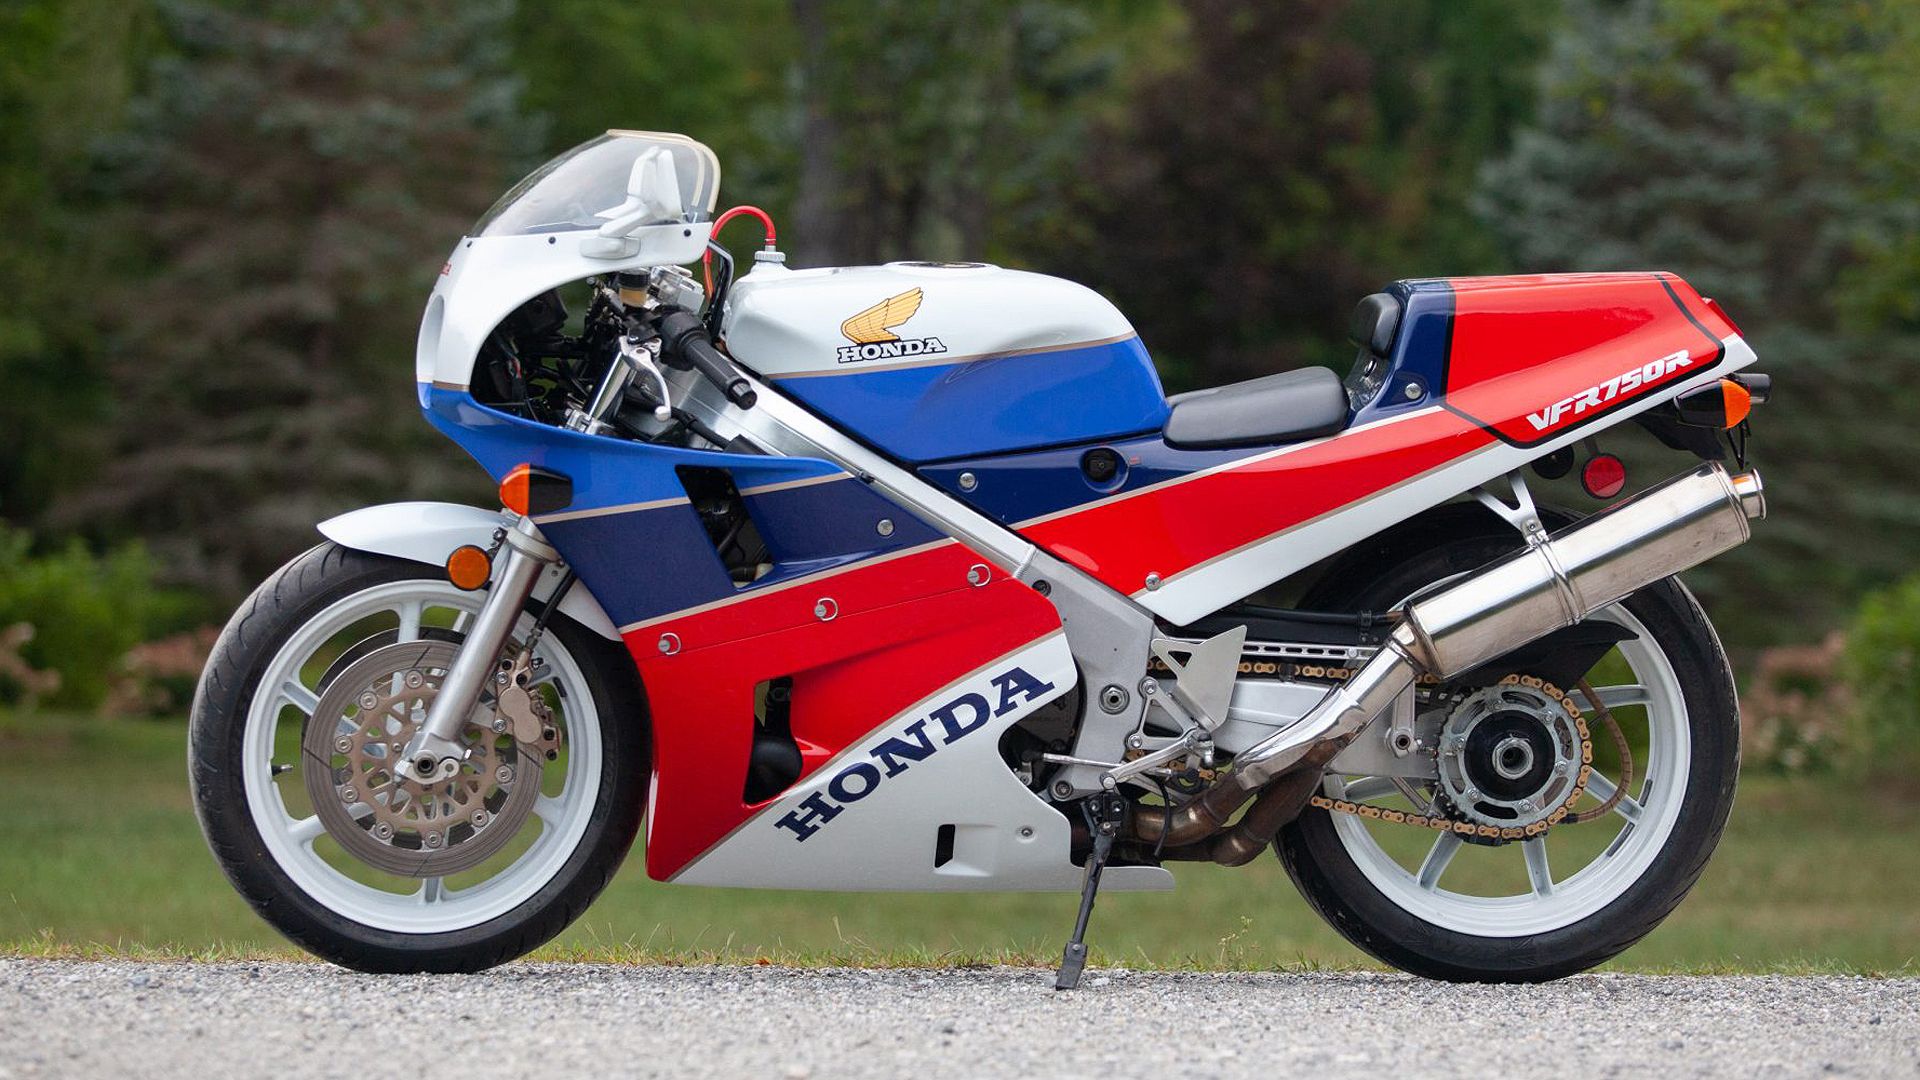 1988 Honda VFR750R RC30 In Red, White & Blue Paint